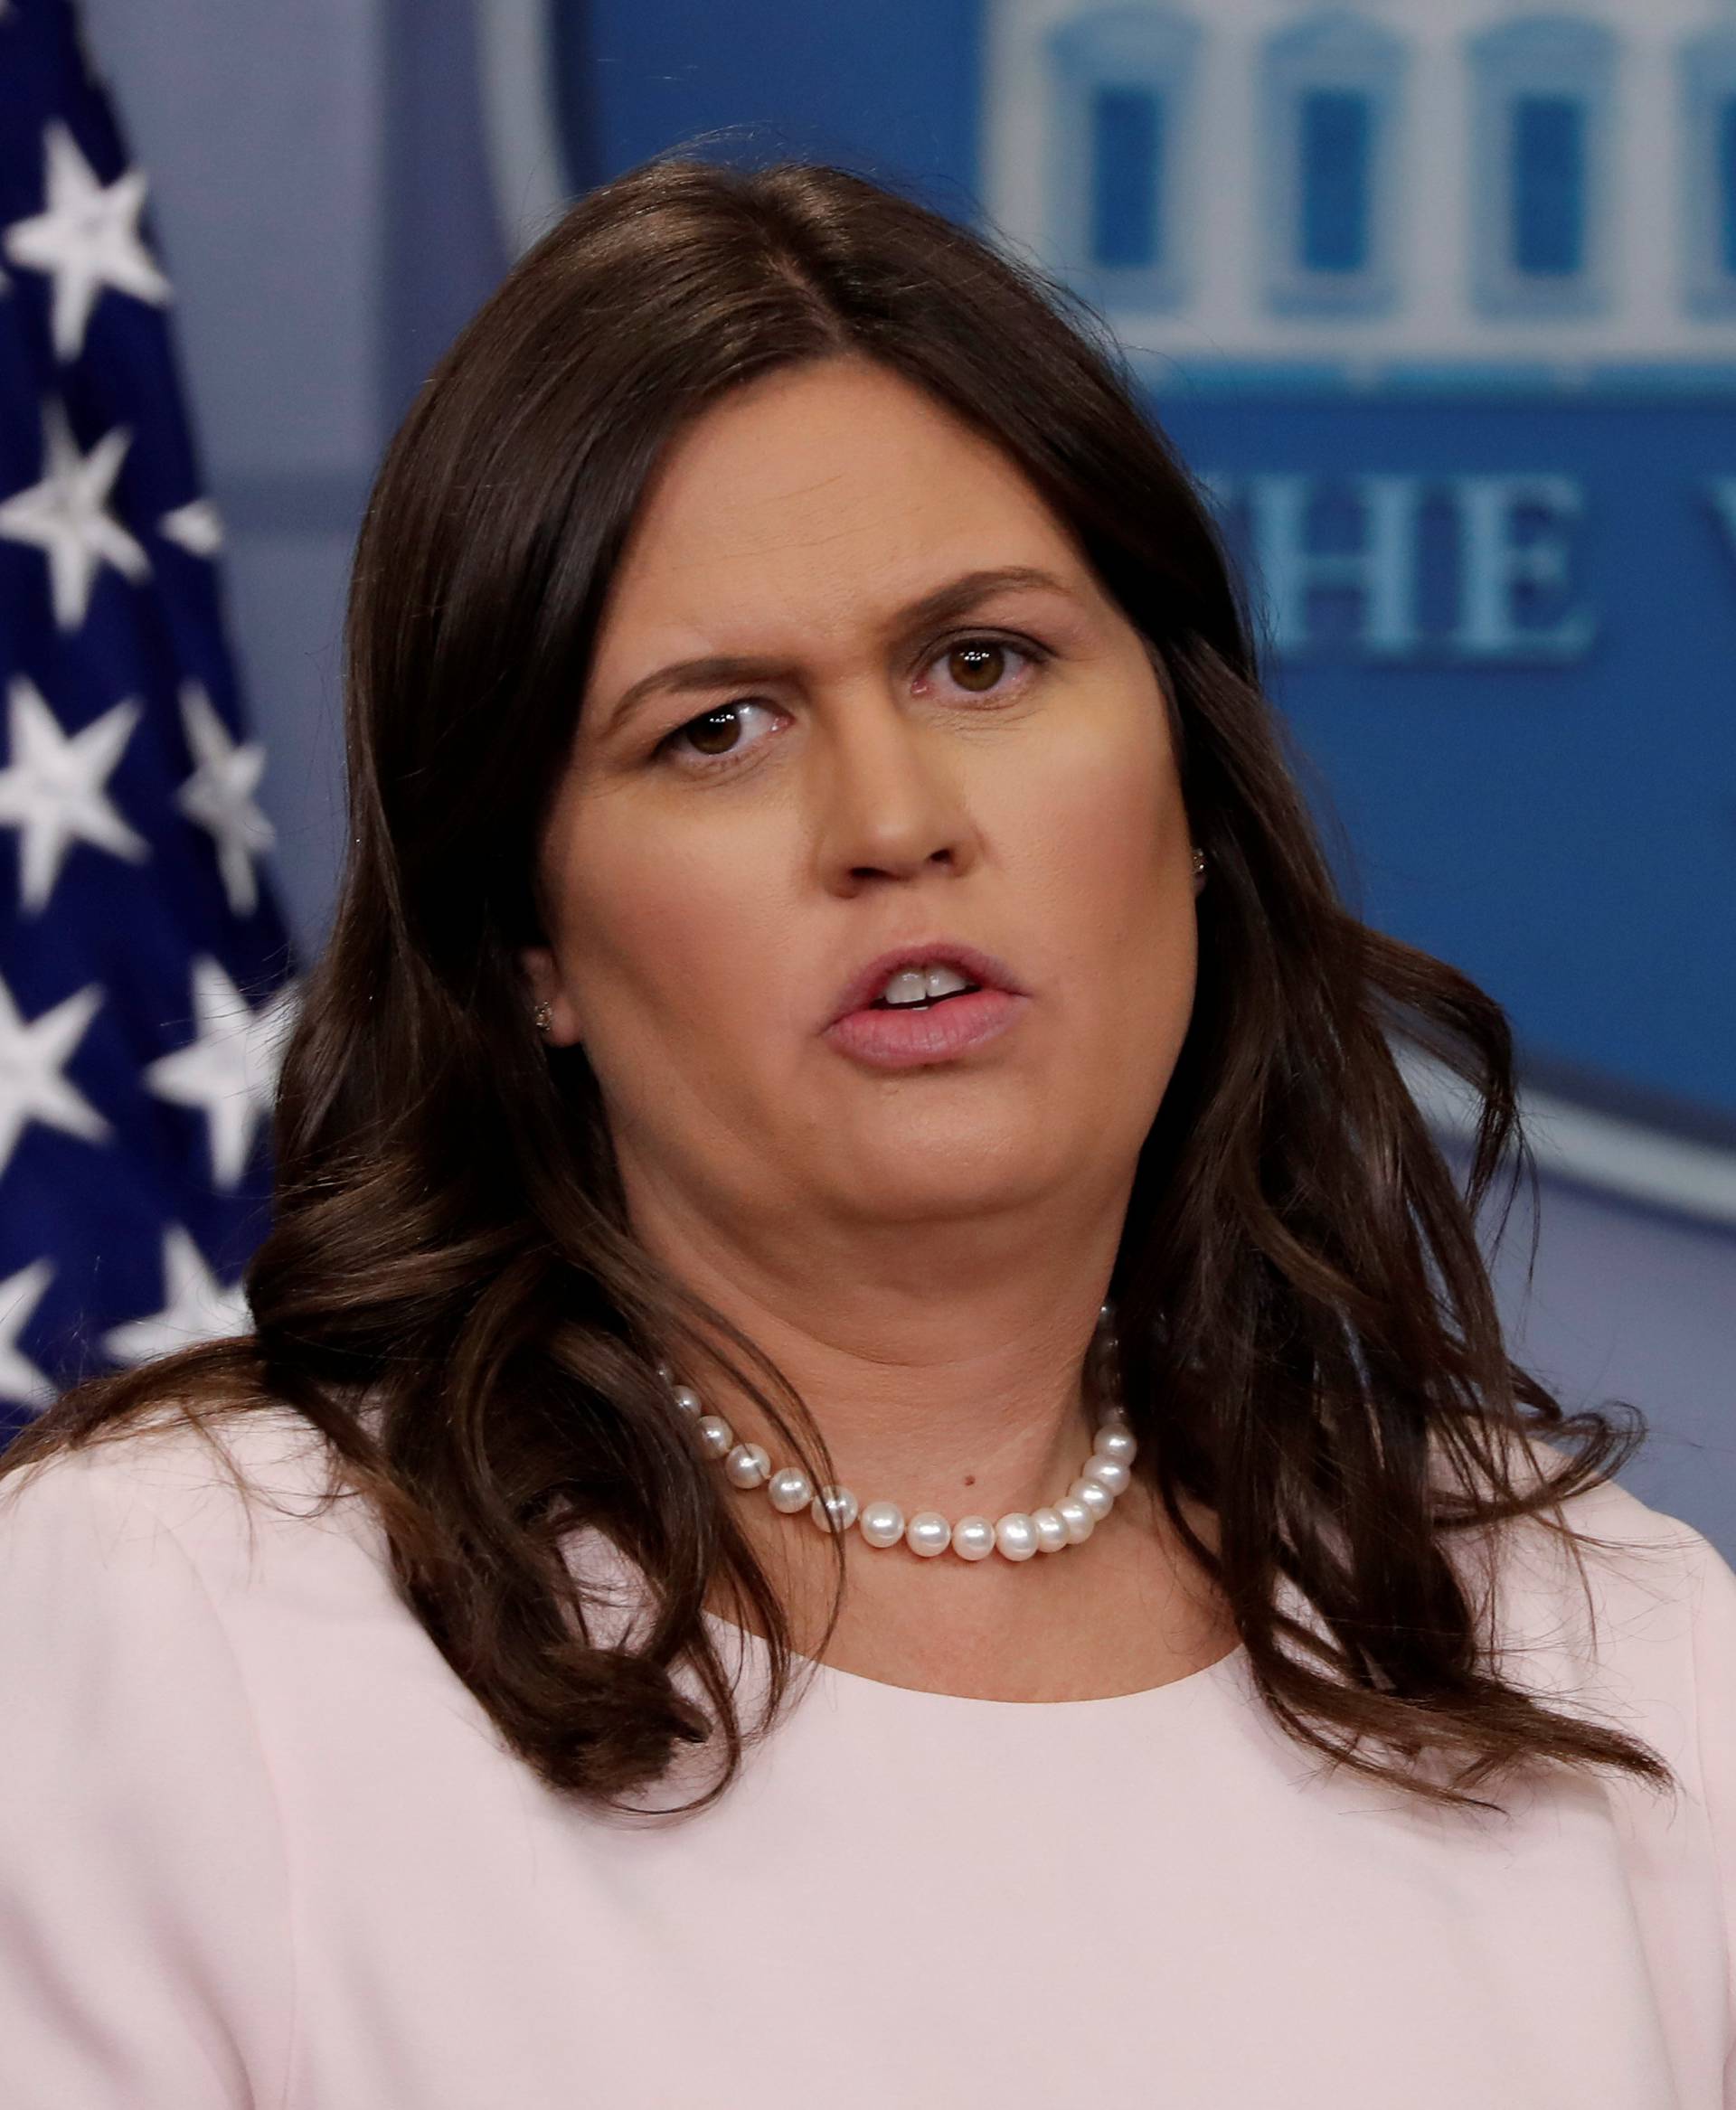 U.S. White House Press Secretary Sarah Huckabee Sanders holds the daily briefing at the White House in Washington, DC